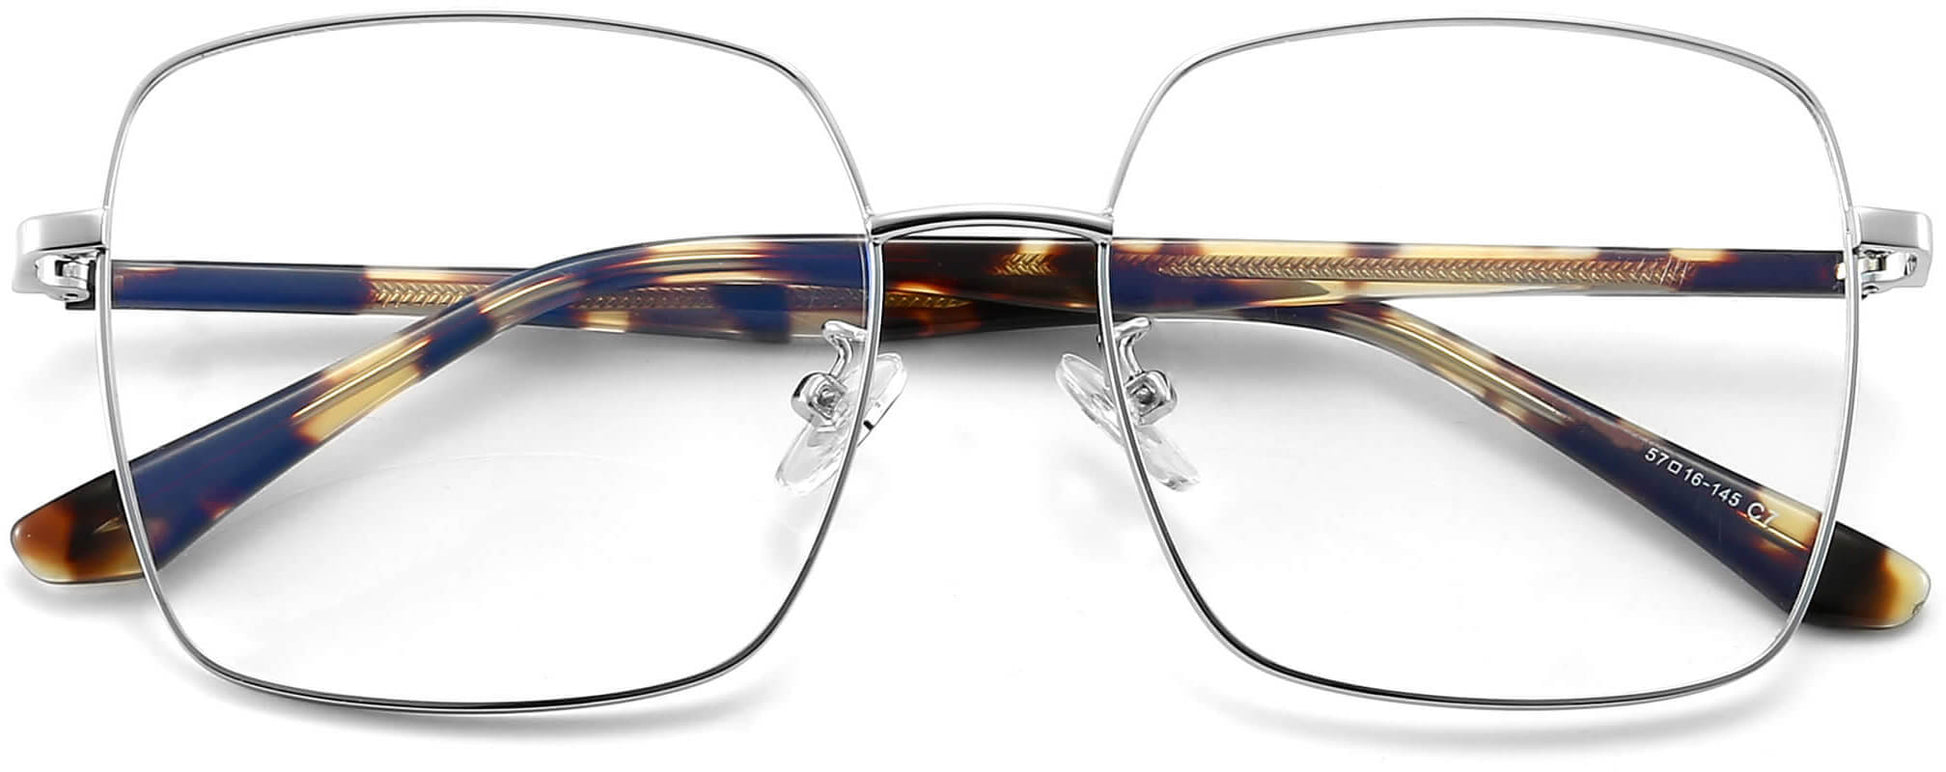 rison square tortoise Eyeglasses from ANRRI, closed view